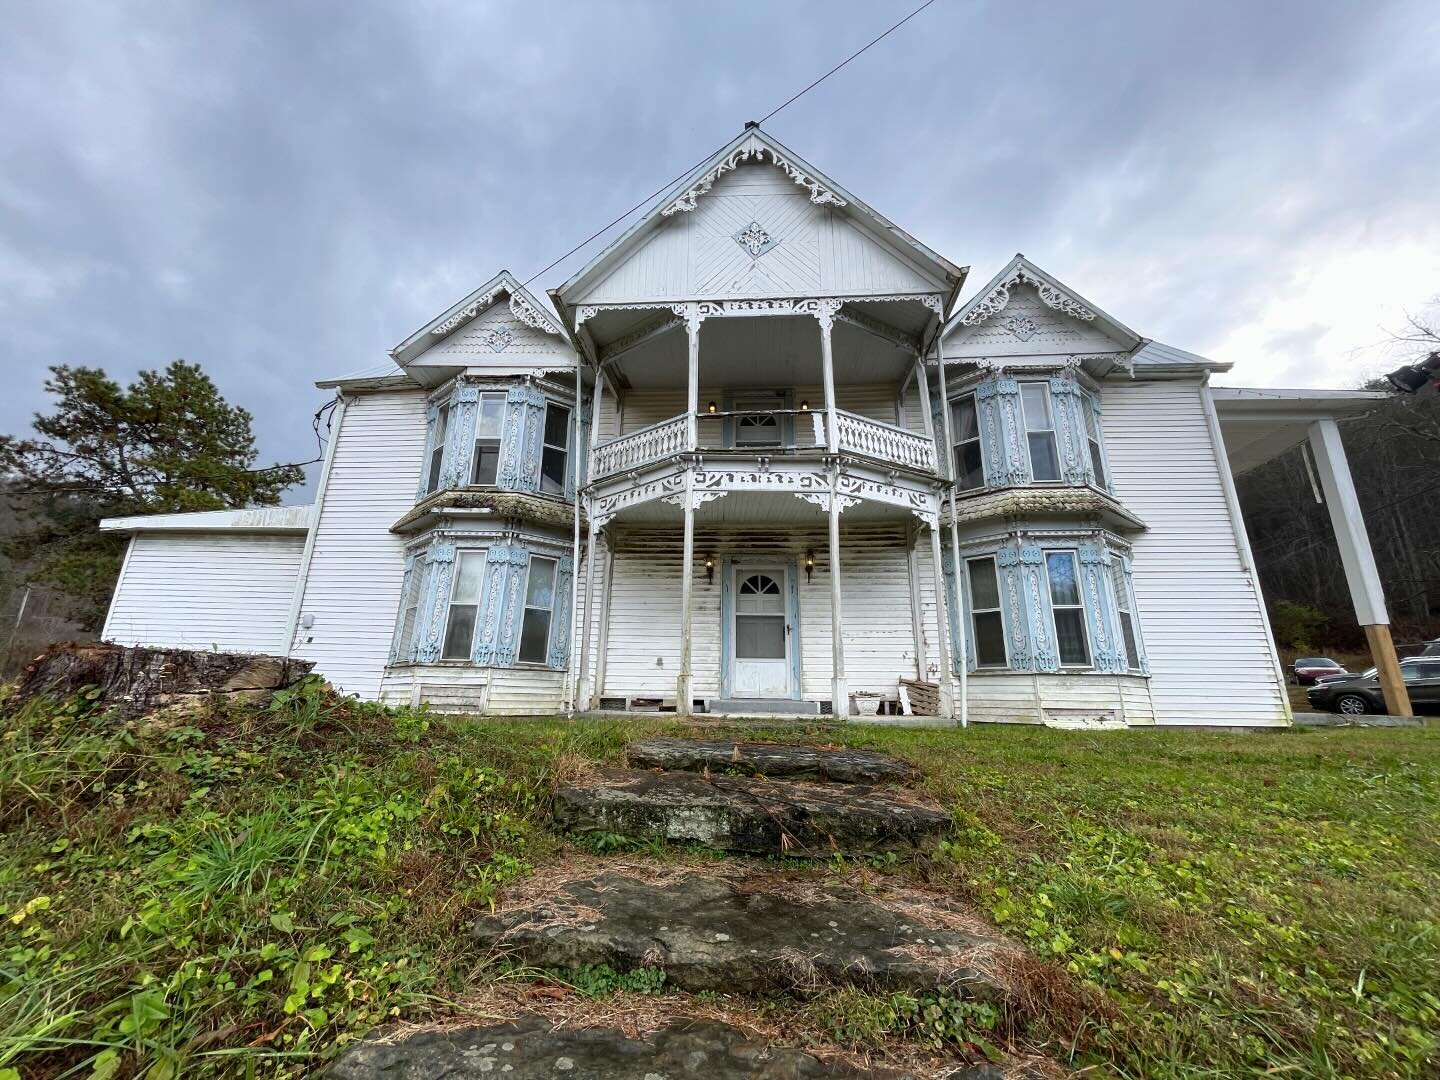 In one of our favorite cases from season two, we investigate the Chesnut House in search of the lost grave of an eccentric former resident. Wait until you see what the team uncovers! Tonight at 9pm PT/ET on T+E 📺 👻